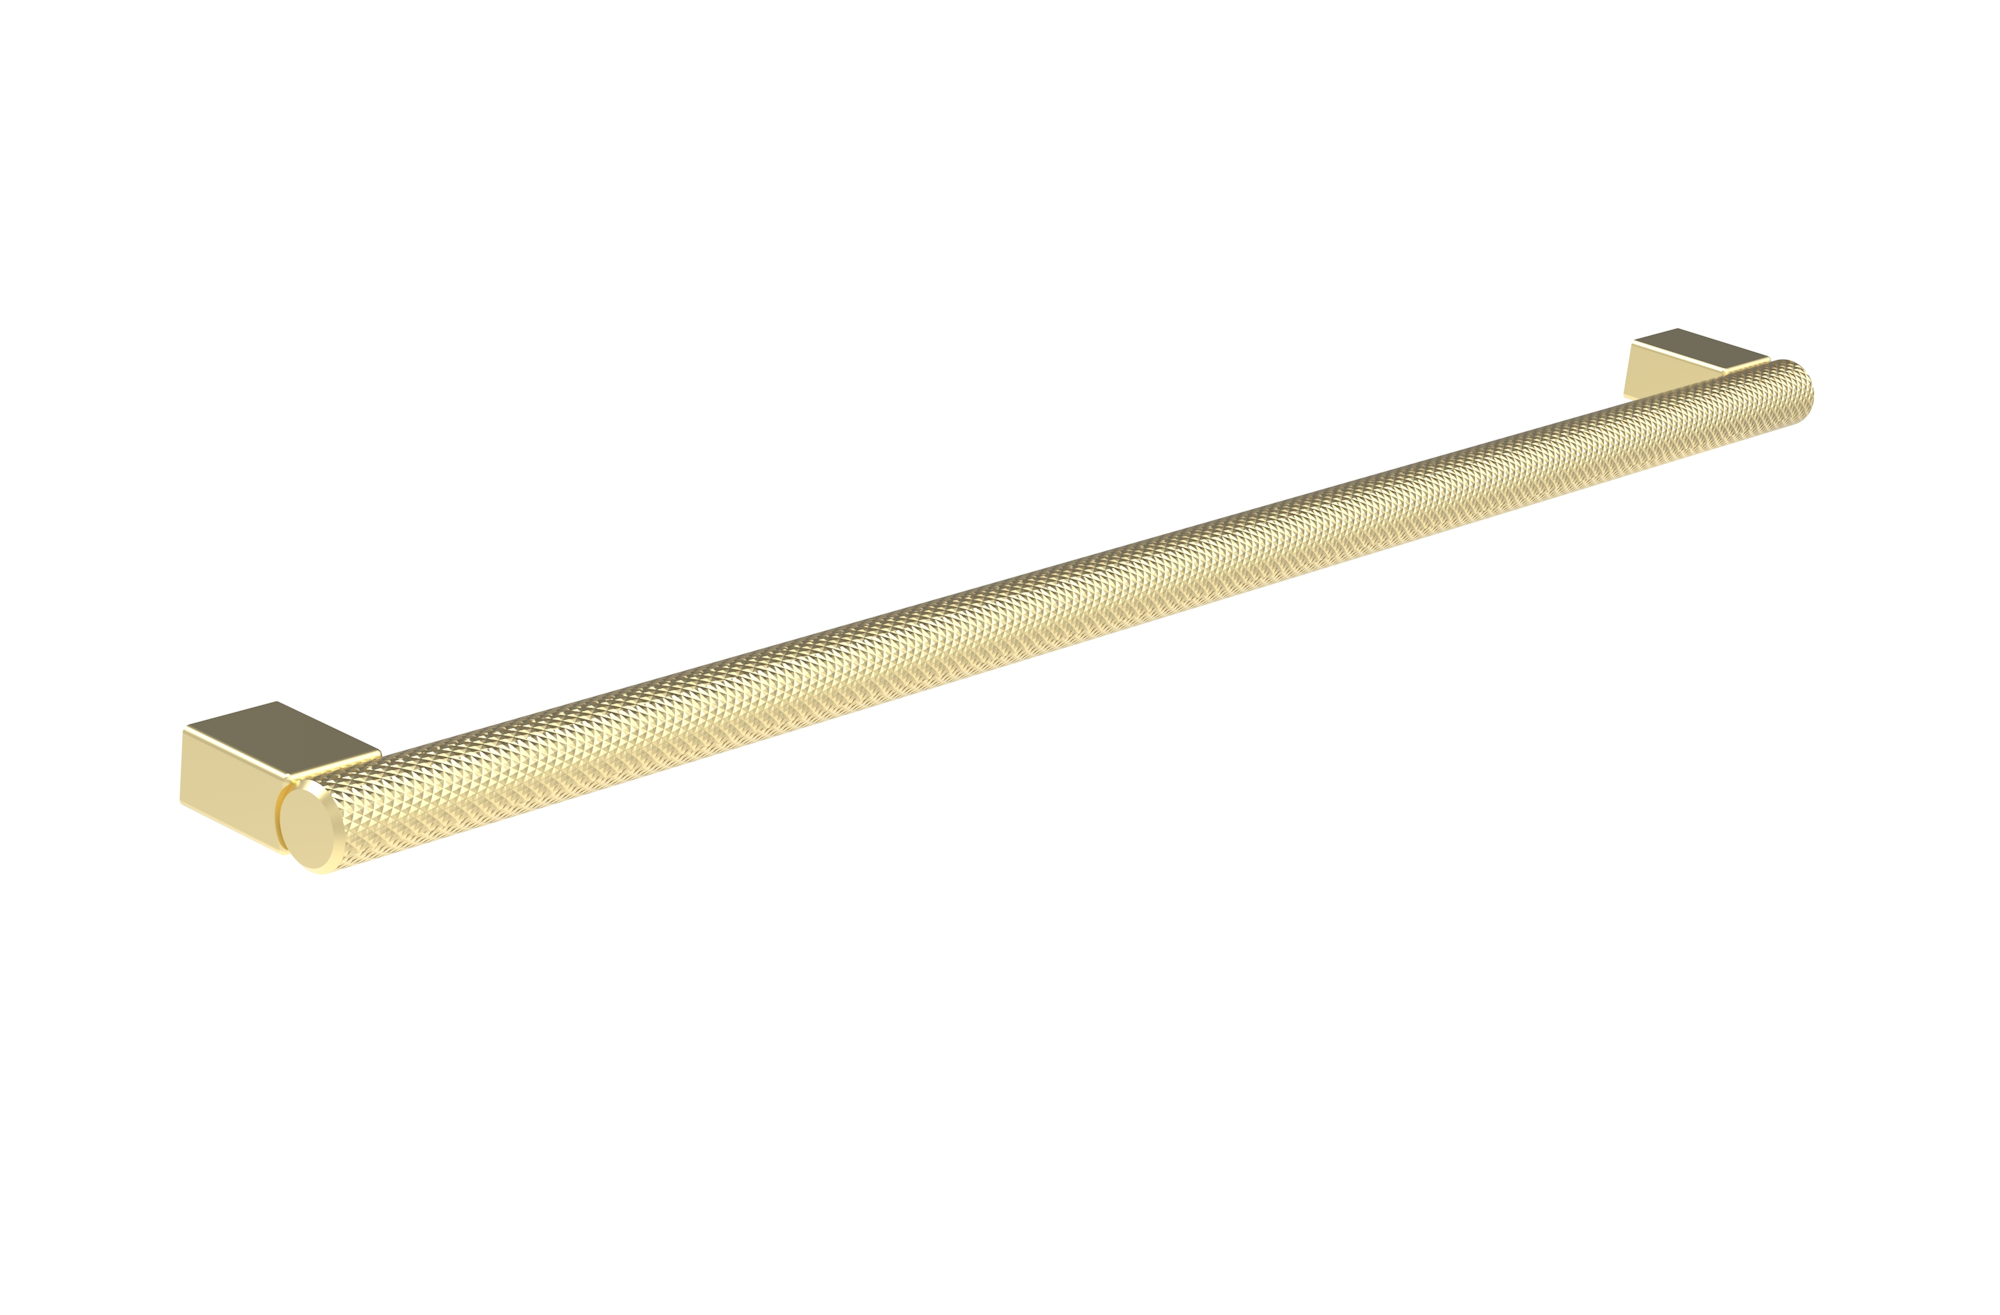 MADRID 320mm knurled handle - Stainless Steel Brushed Brass